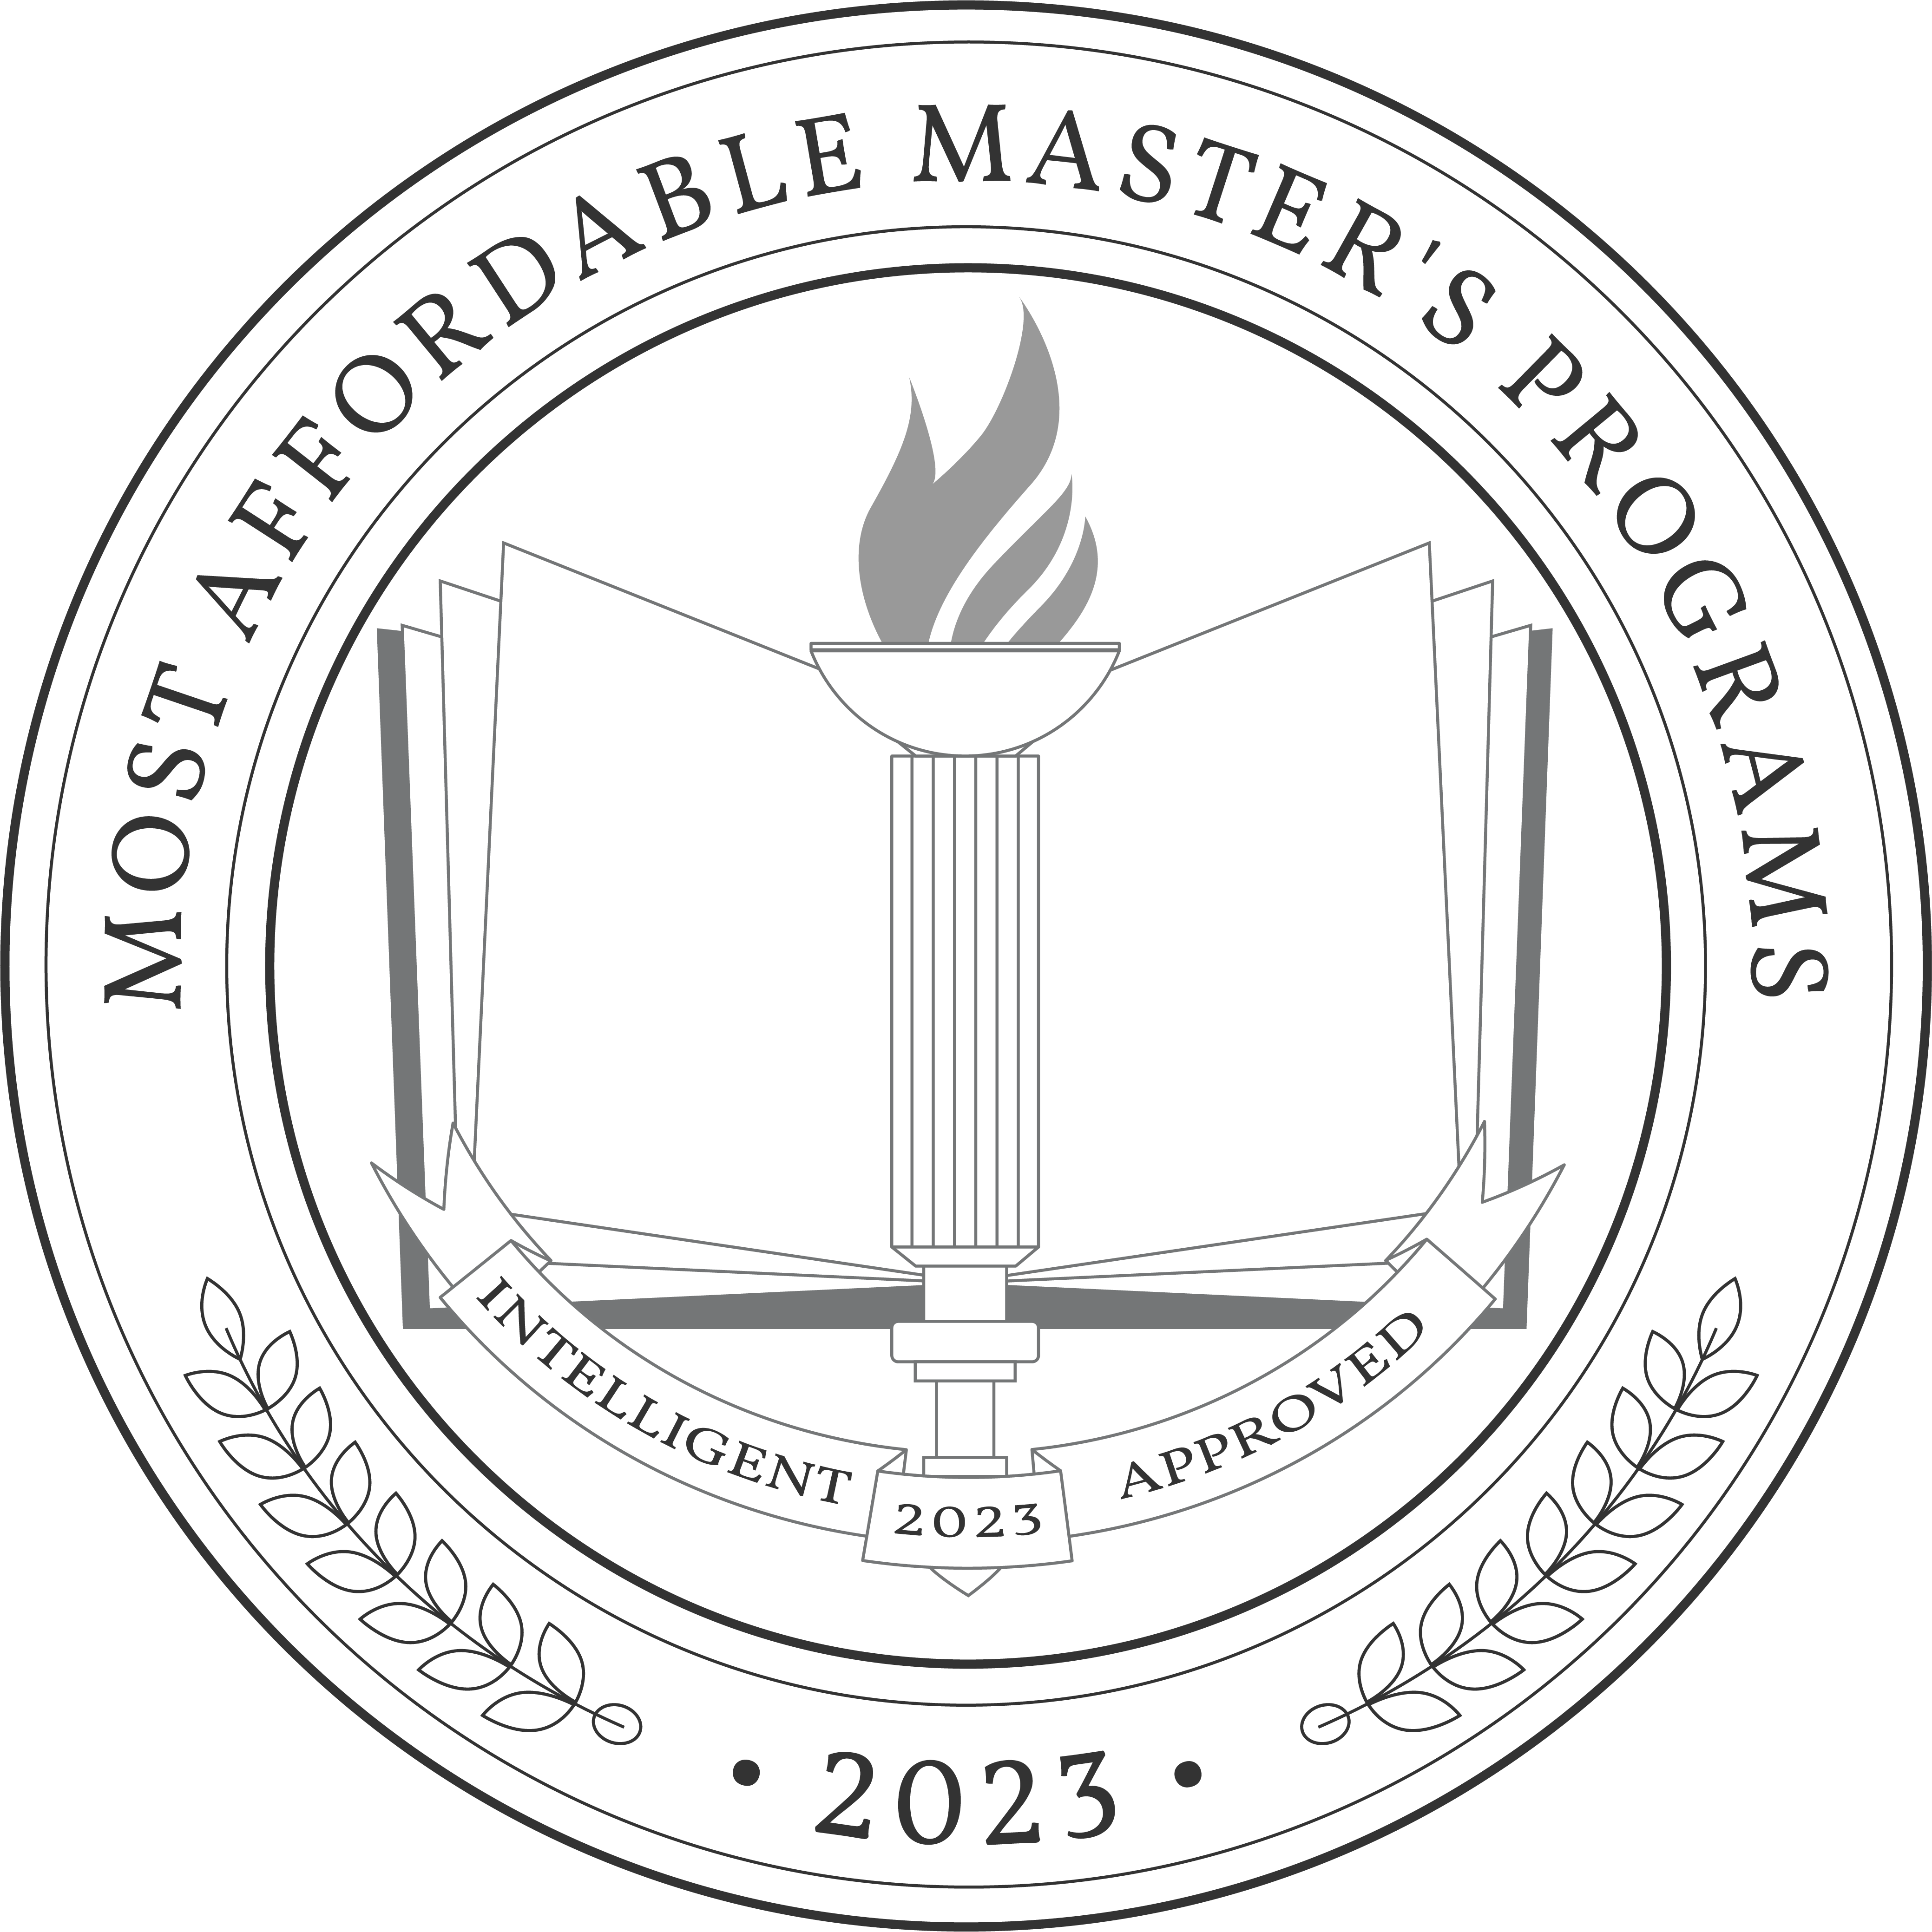 Most Affordable Master's Programs badge